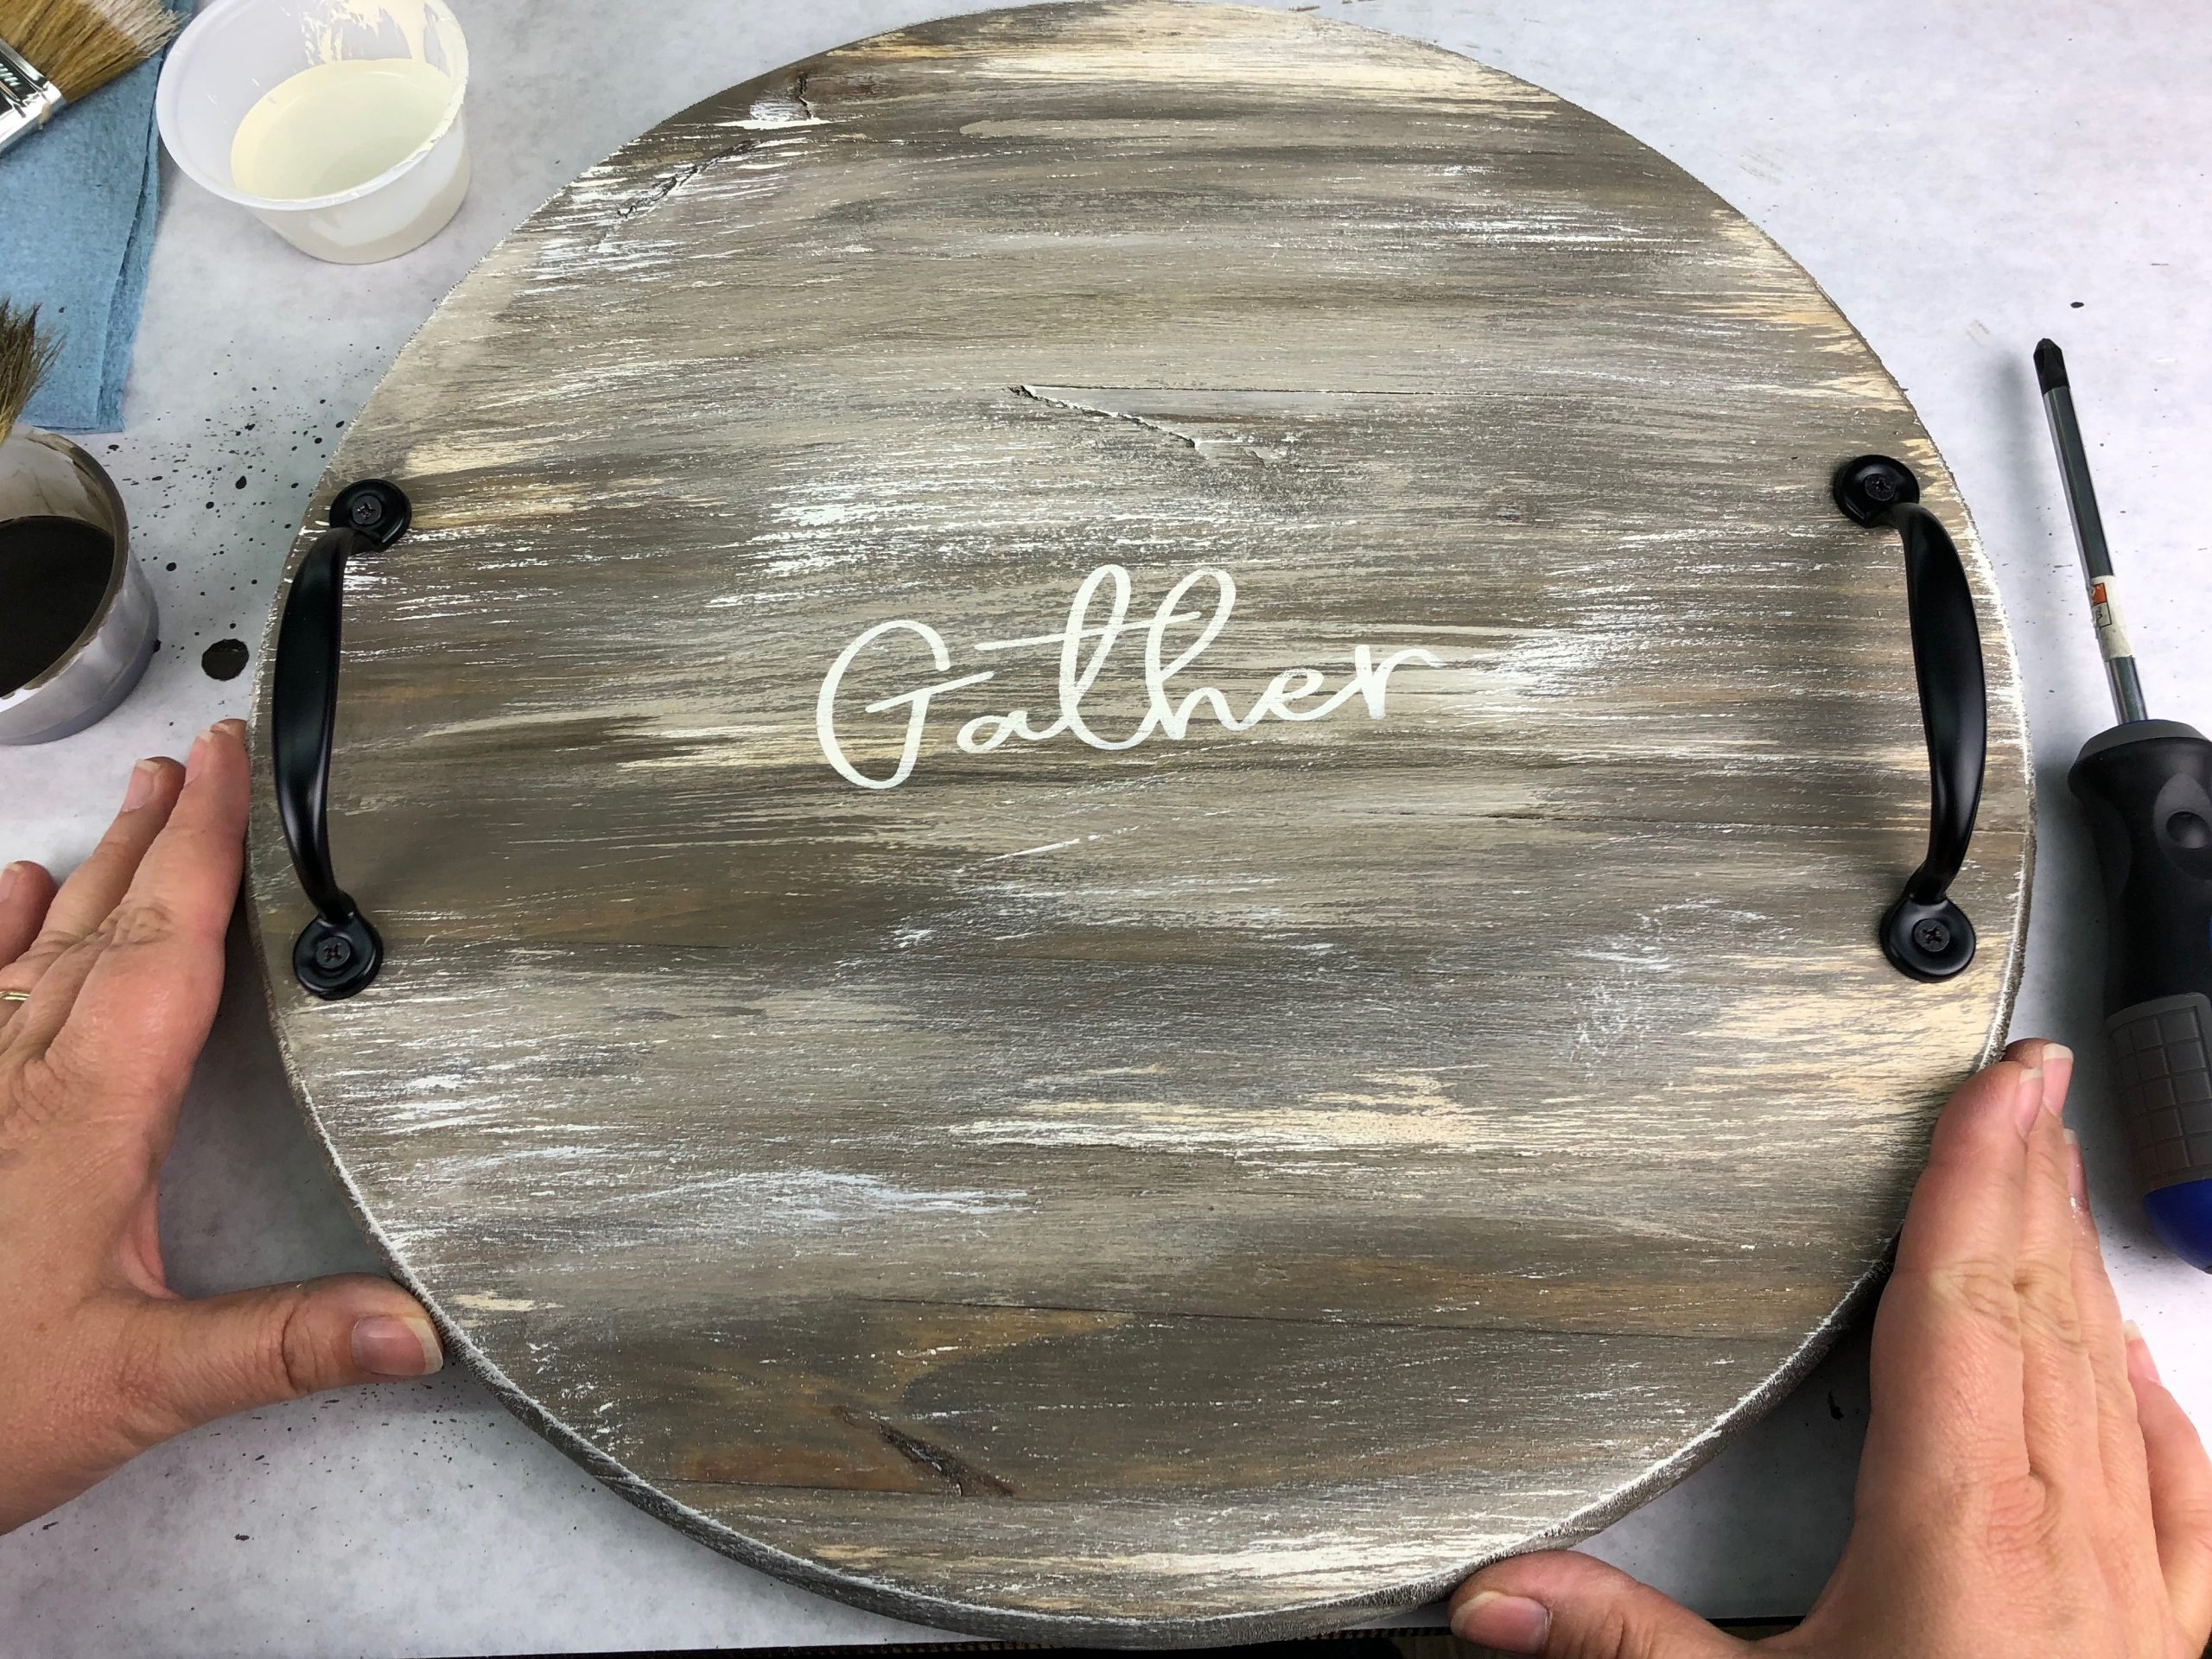 home made rustic round serving tray with handles and "gather" text